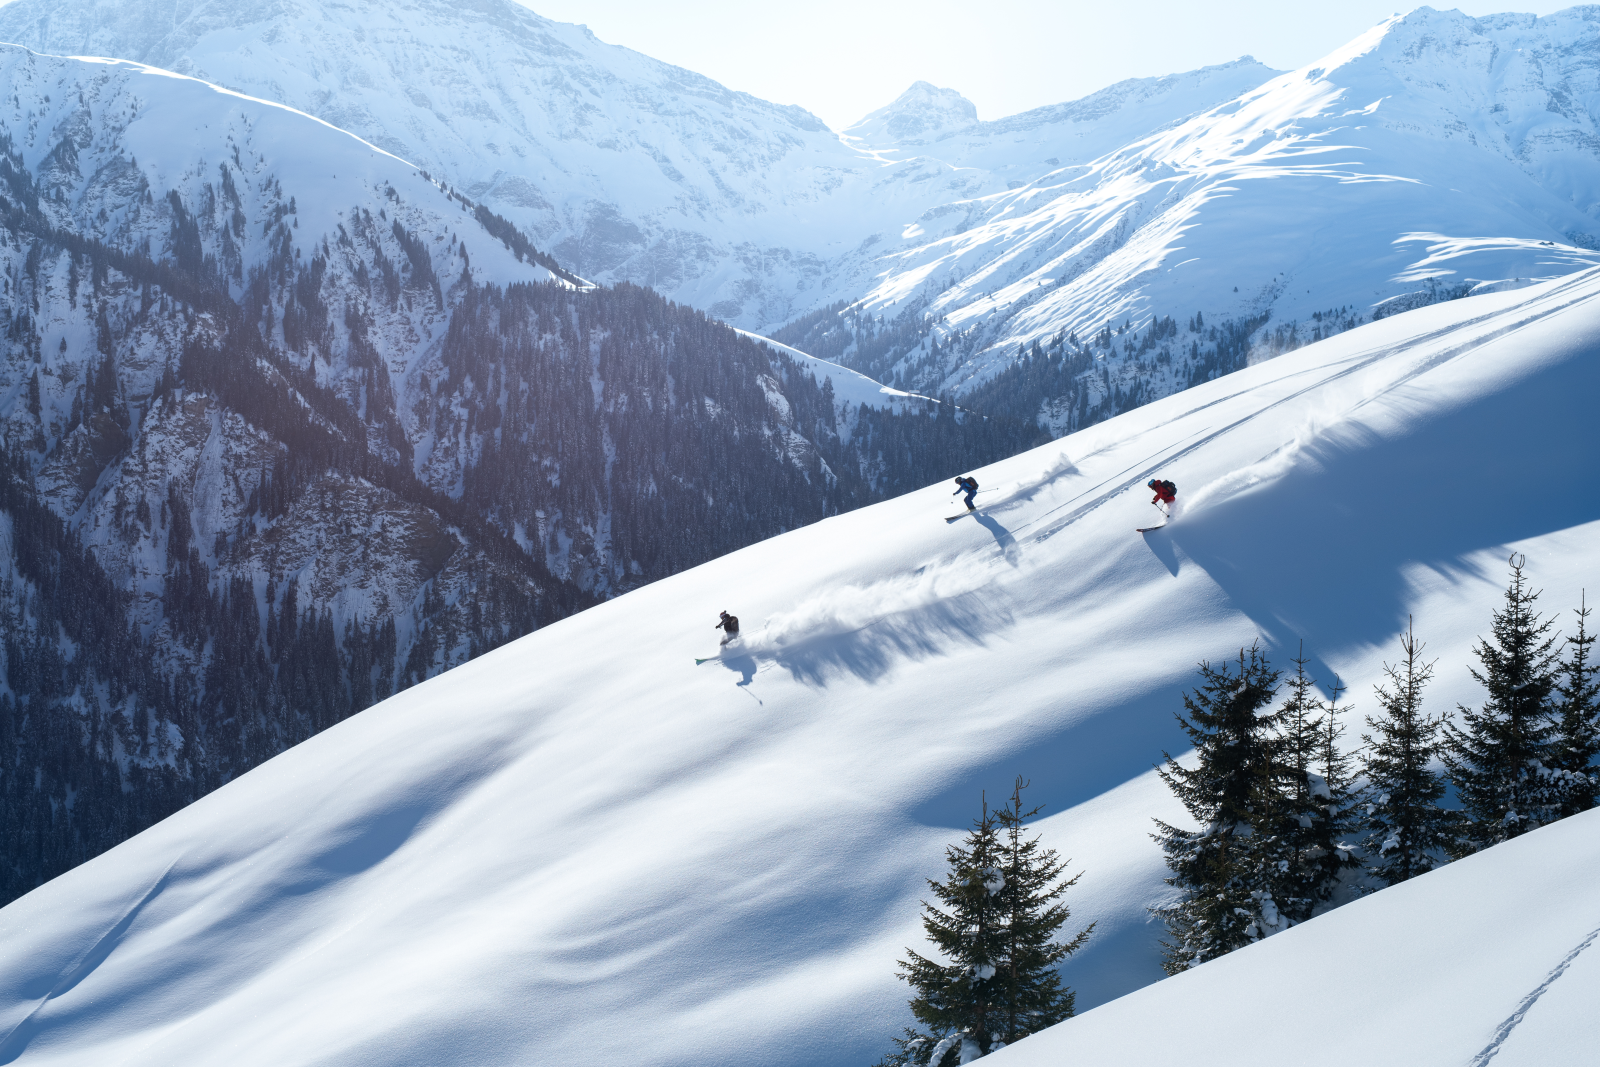 Top Tips for Powder Skiing: How to Master the Art of Skiing in Fresh Powder